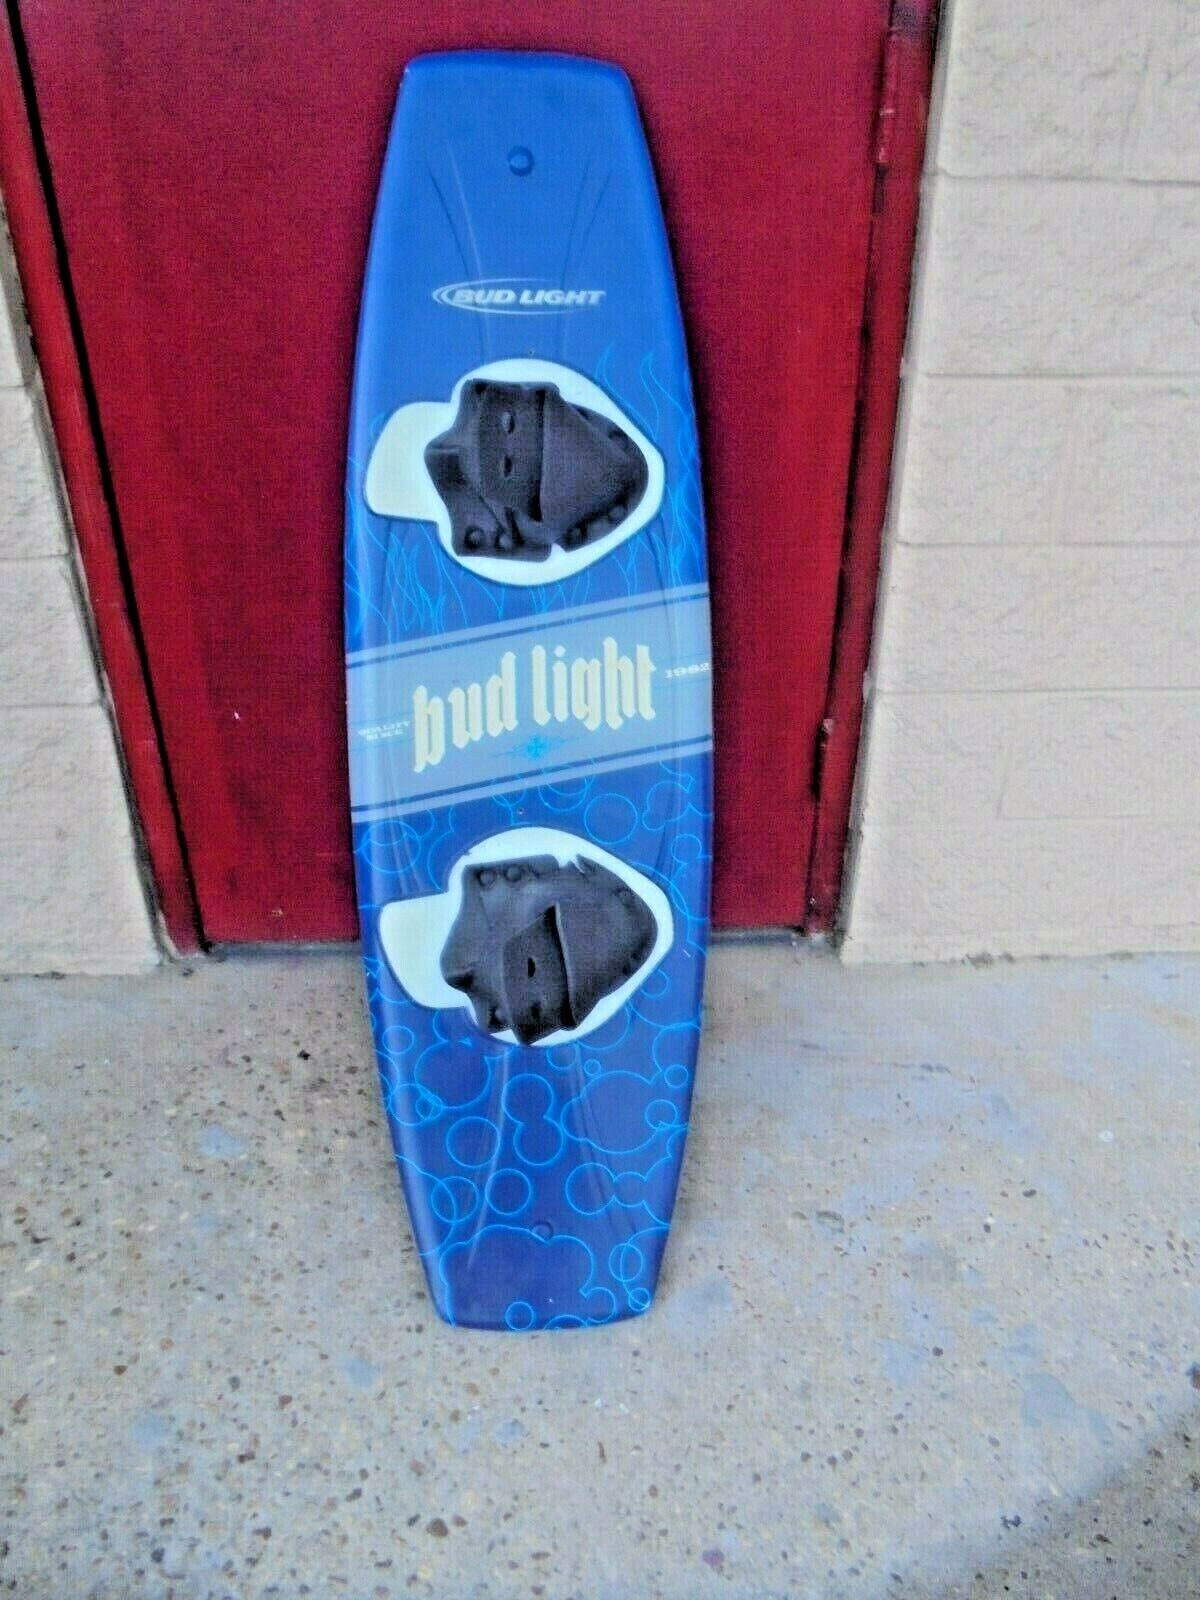 WAKE BOARD, BUD LIGHT  (FOR PROMOTIONAL USE ONLY NOT TO BE USED AS